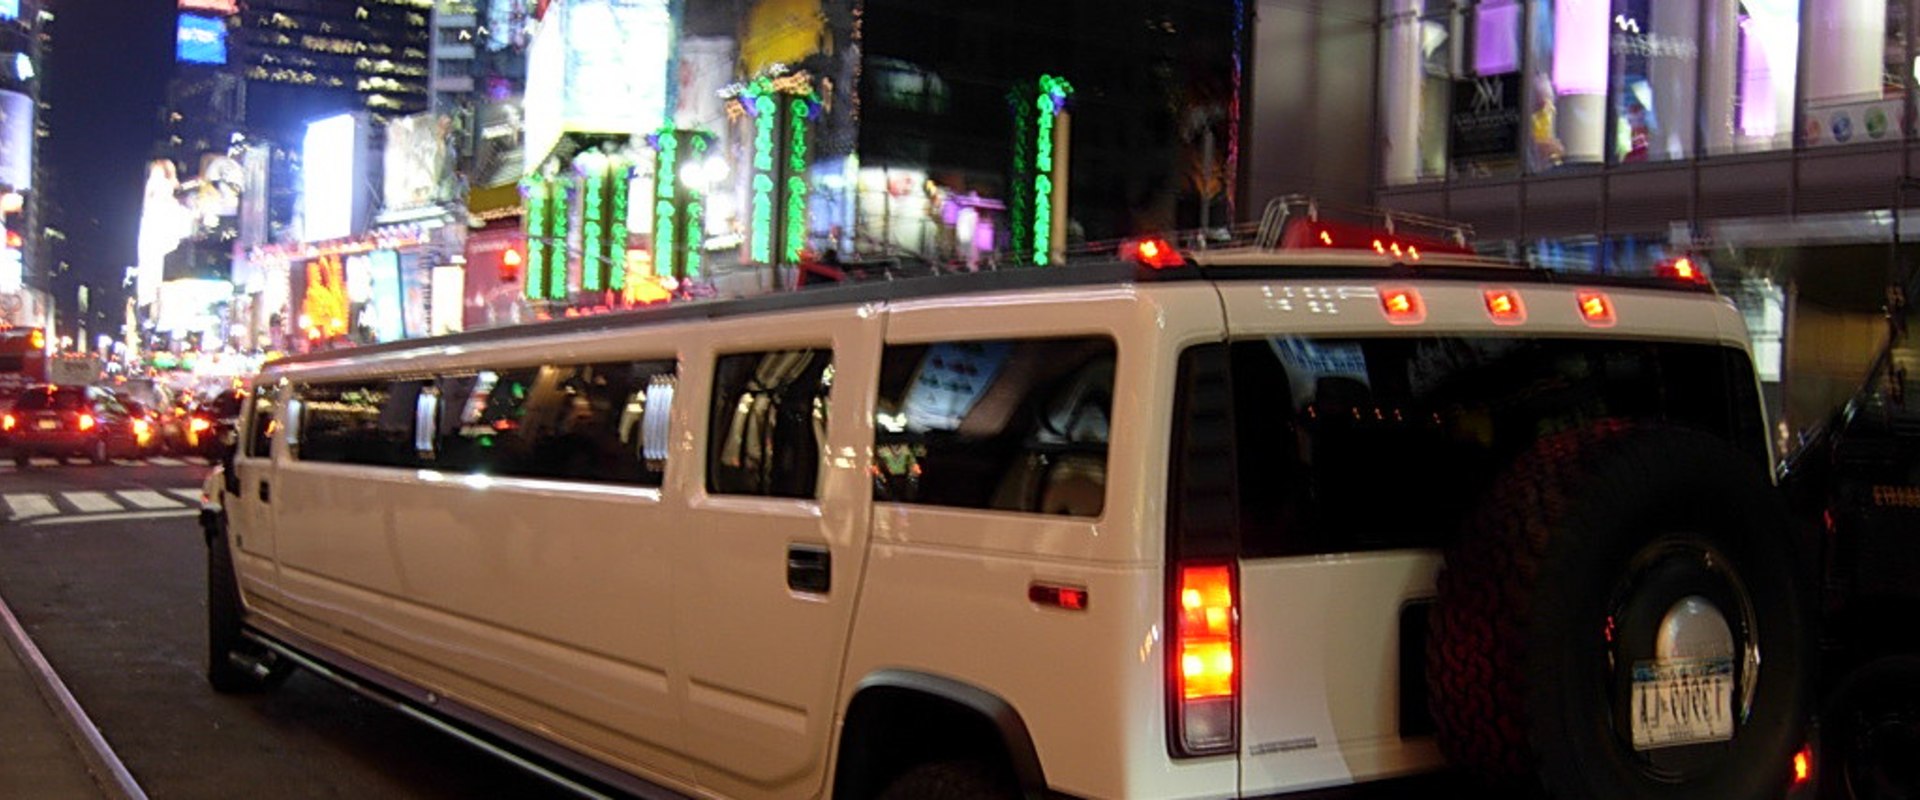 How much is a limo from jfk to times square?